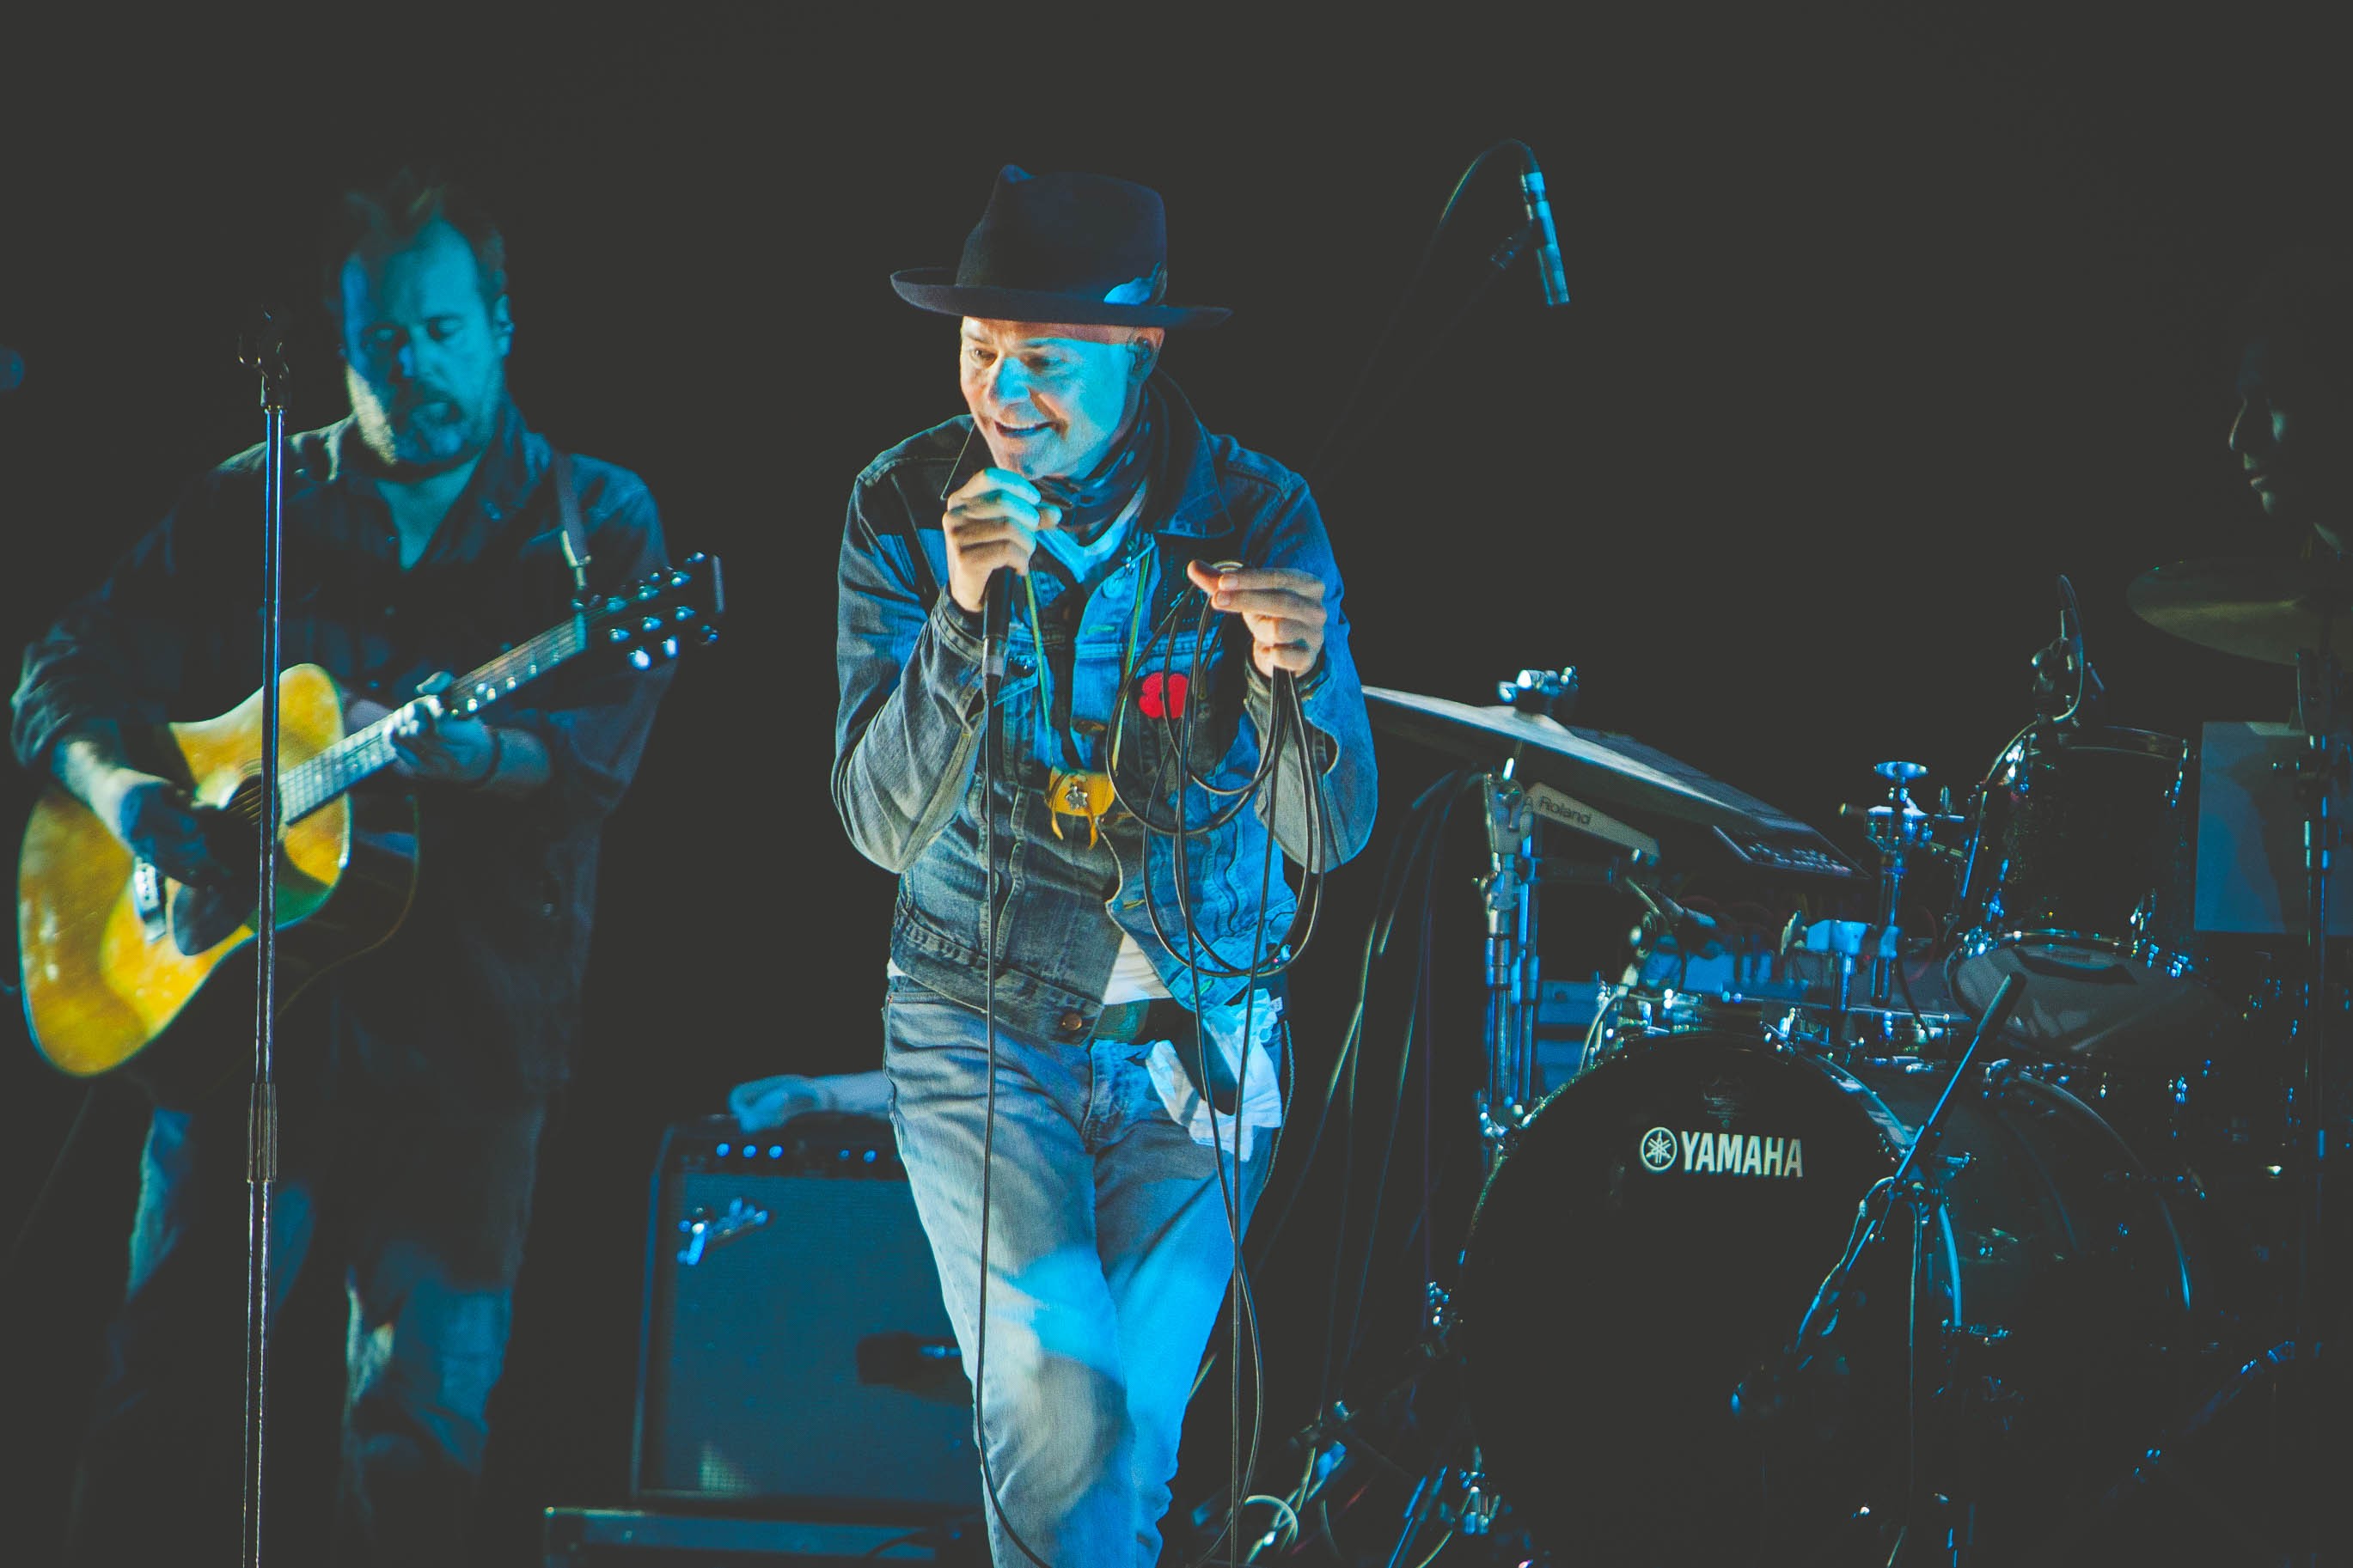 SEE IT: Photos from the Gord Downie's Secret Path concert